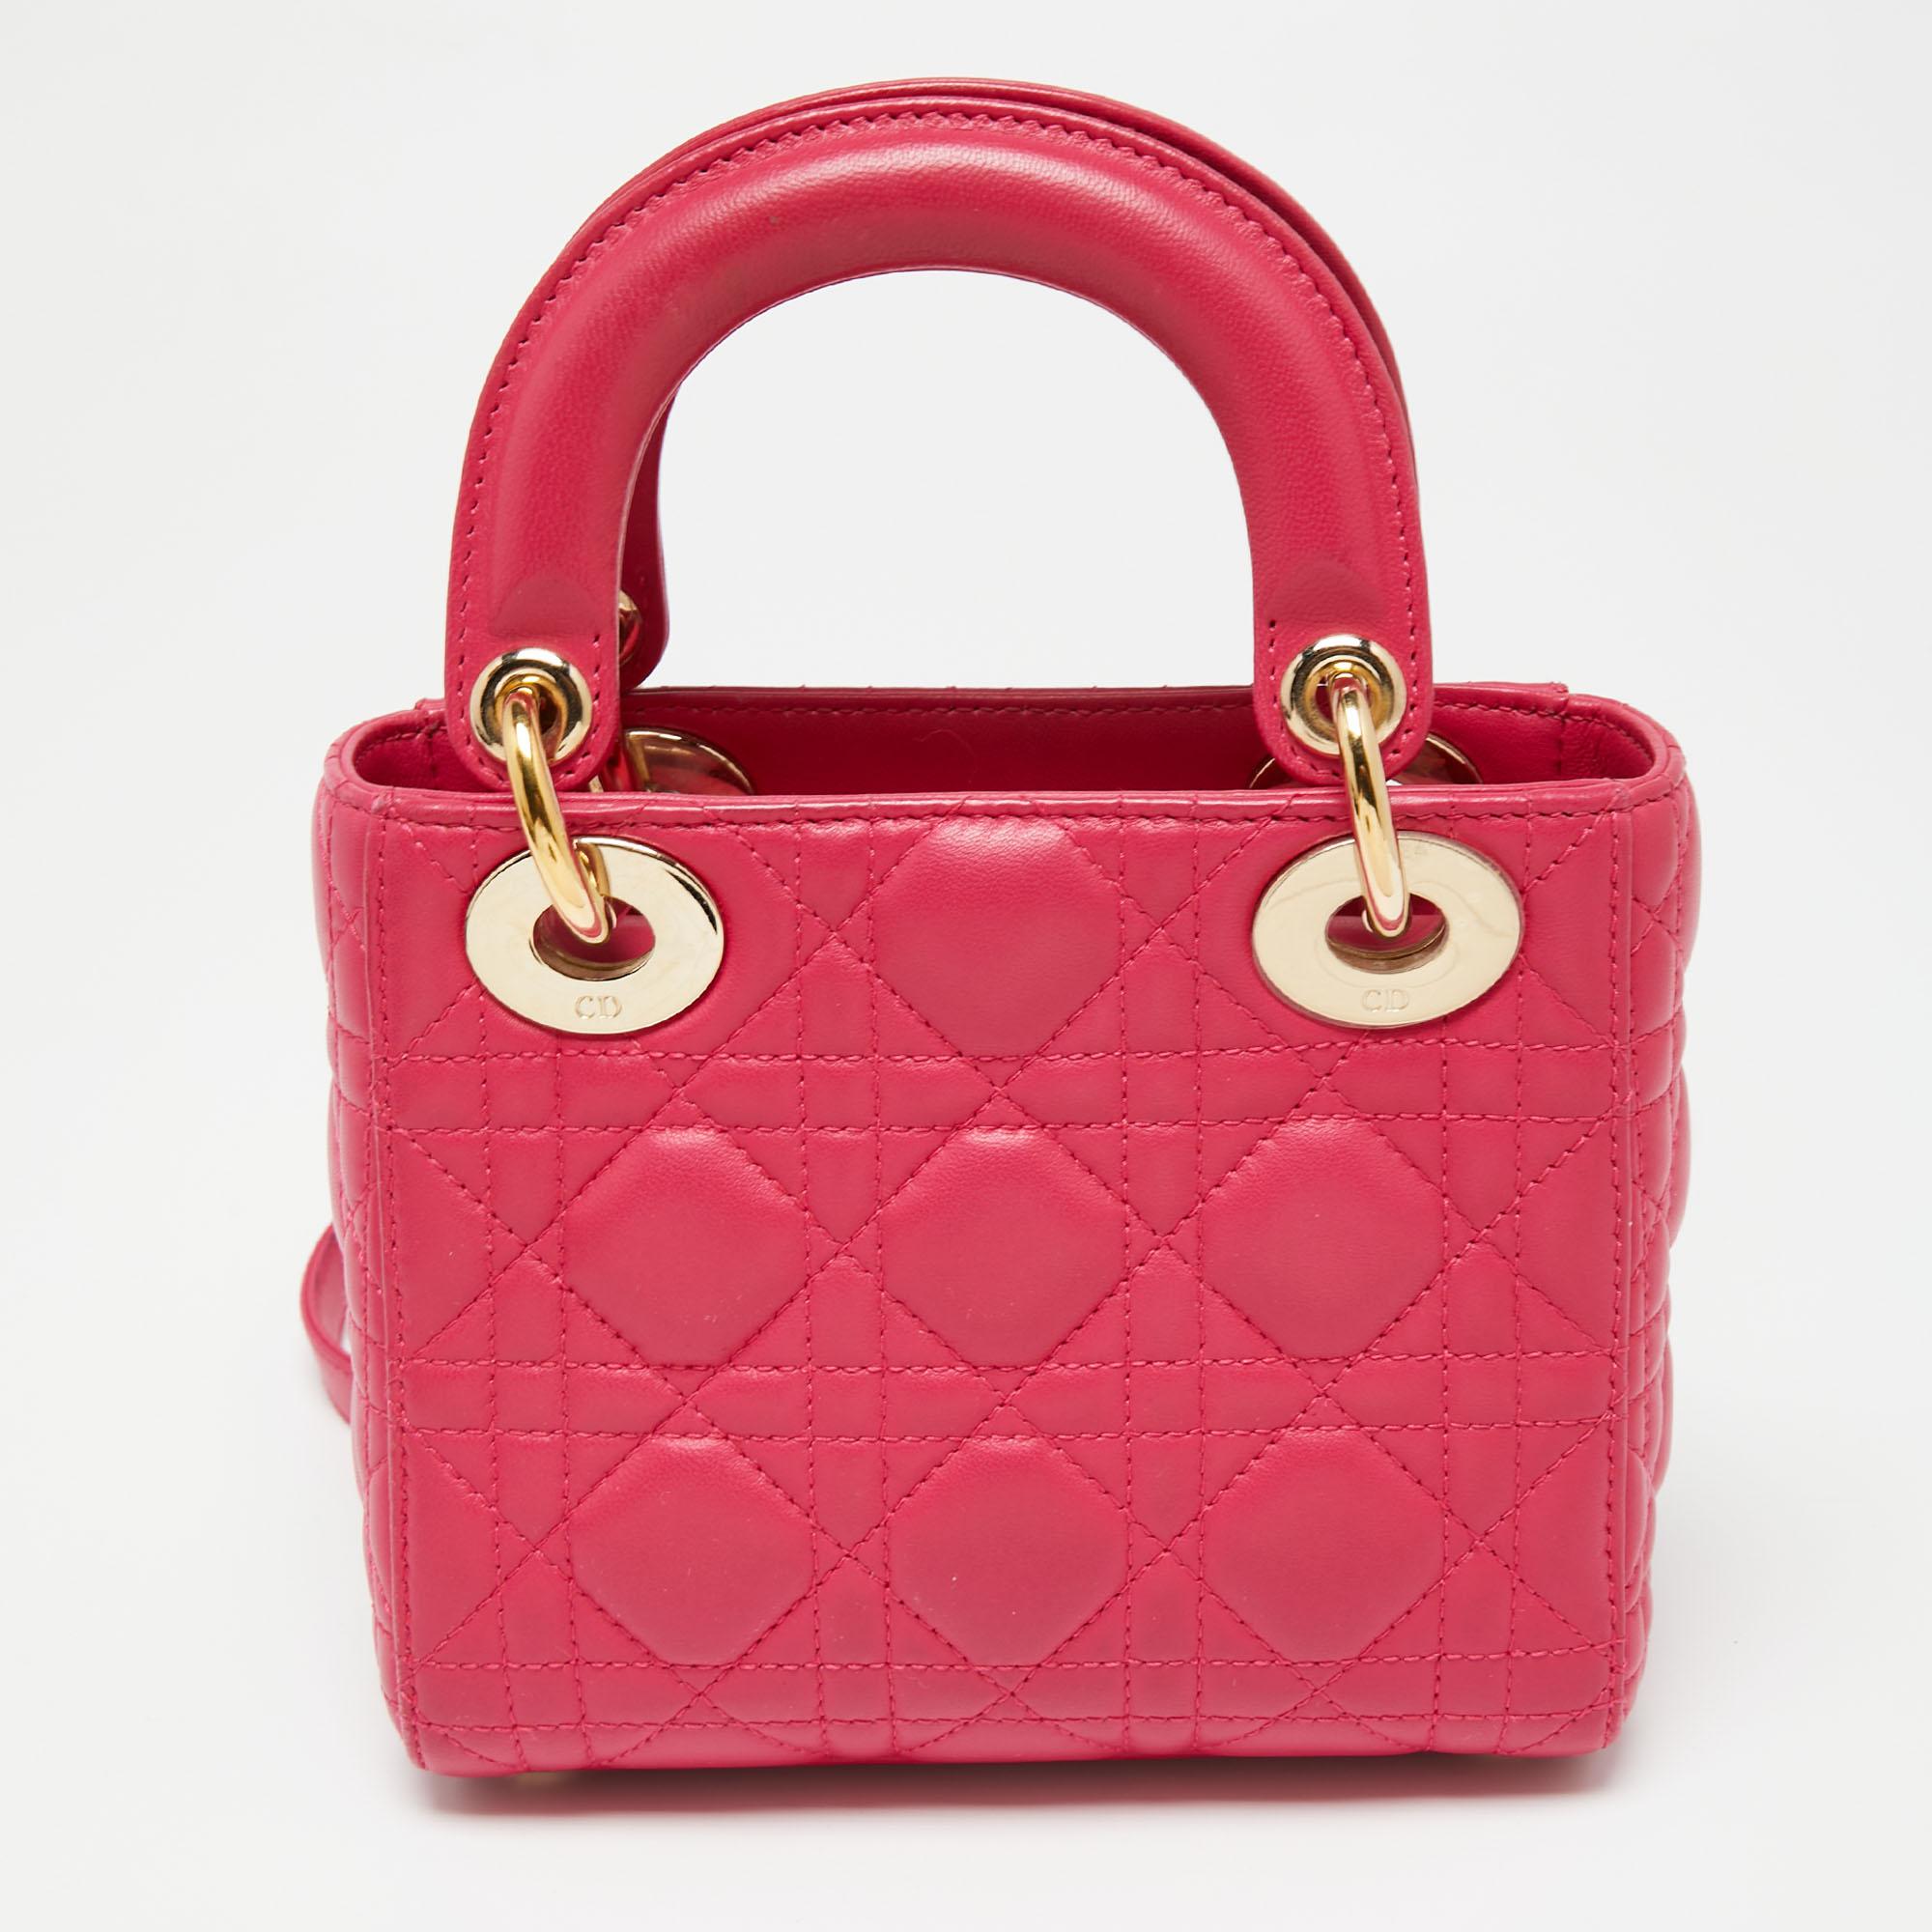 The Lady Dior's timeless status and never-aging beauty have made it an iconic accessory and a great fashion investment. We have here this mini Lady Dior tote, sewn using fuchsia leather and fitted with two top handles, a shoulder strap, and Dior